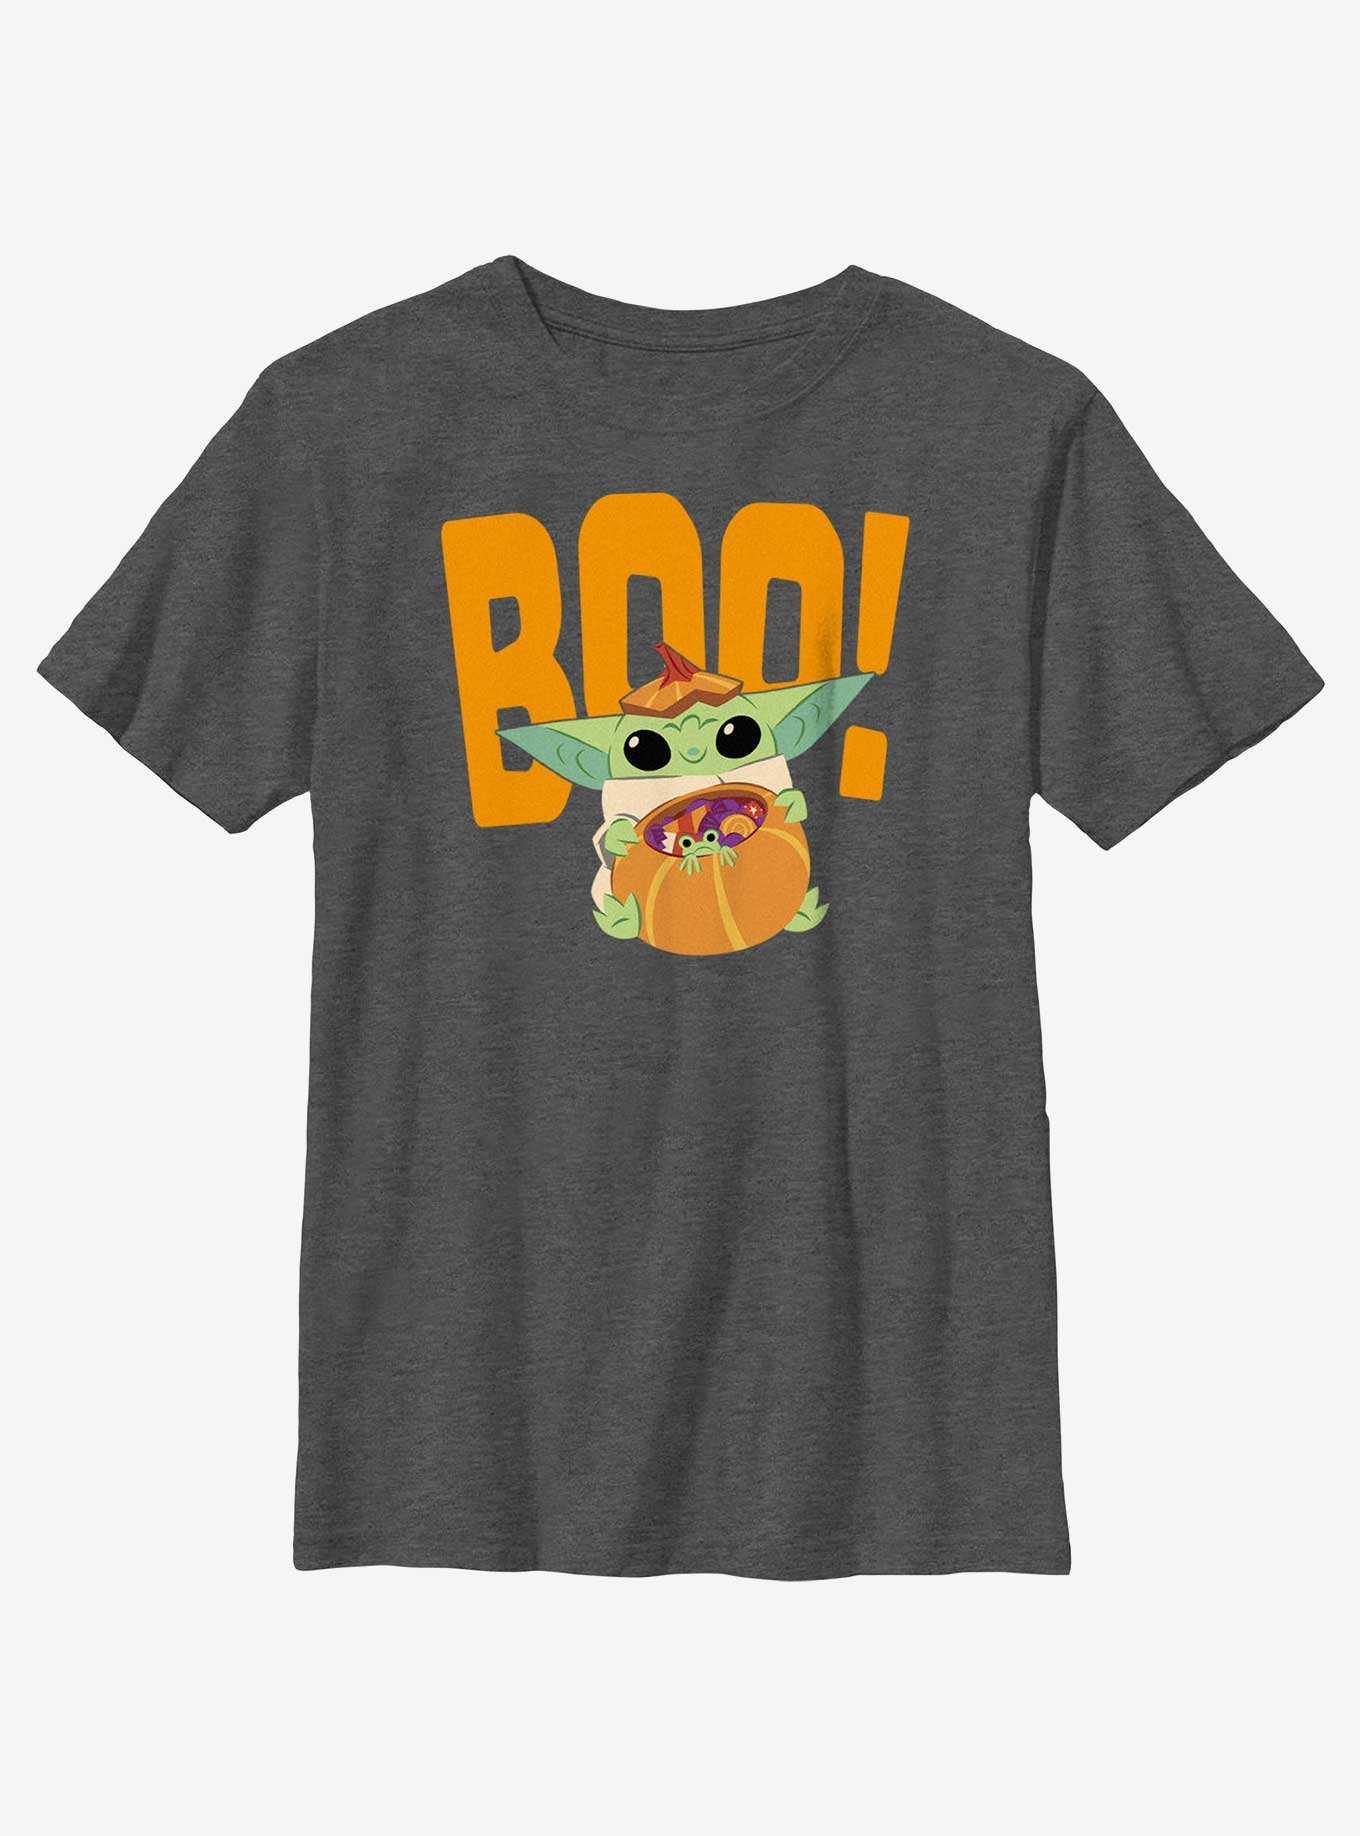 Star Wars The Mandalorian The Child Boo Youth T-Shirt, , hi-res